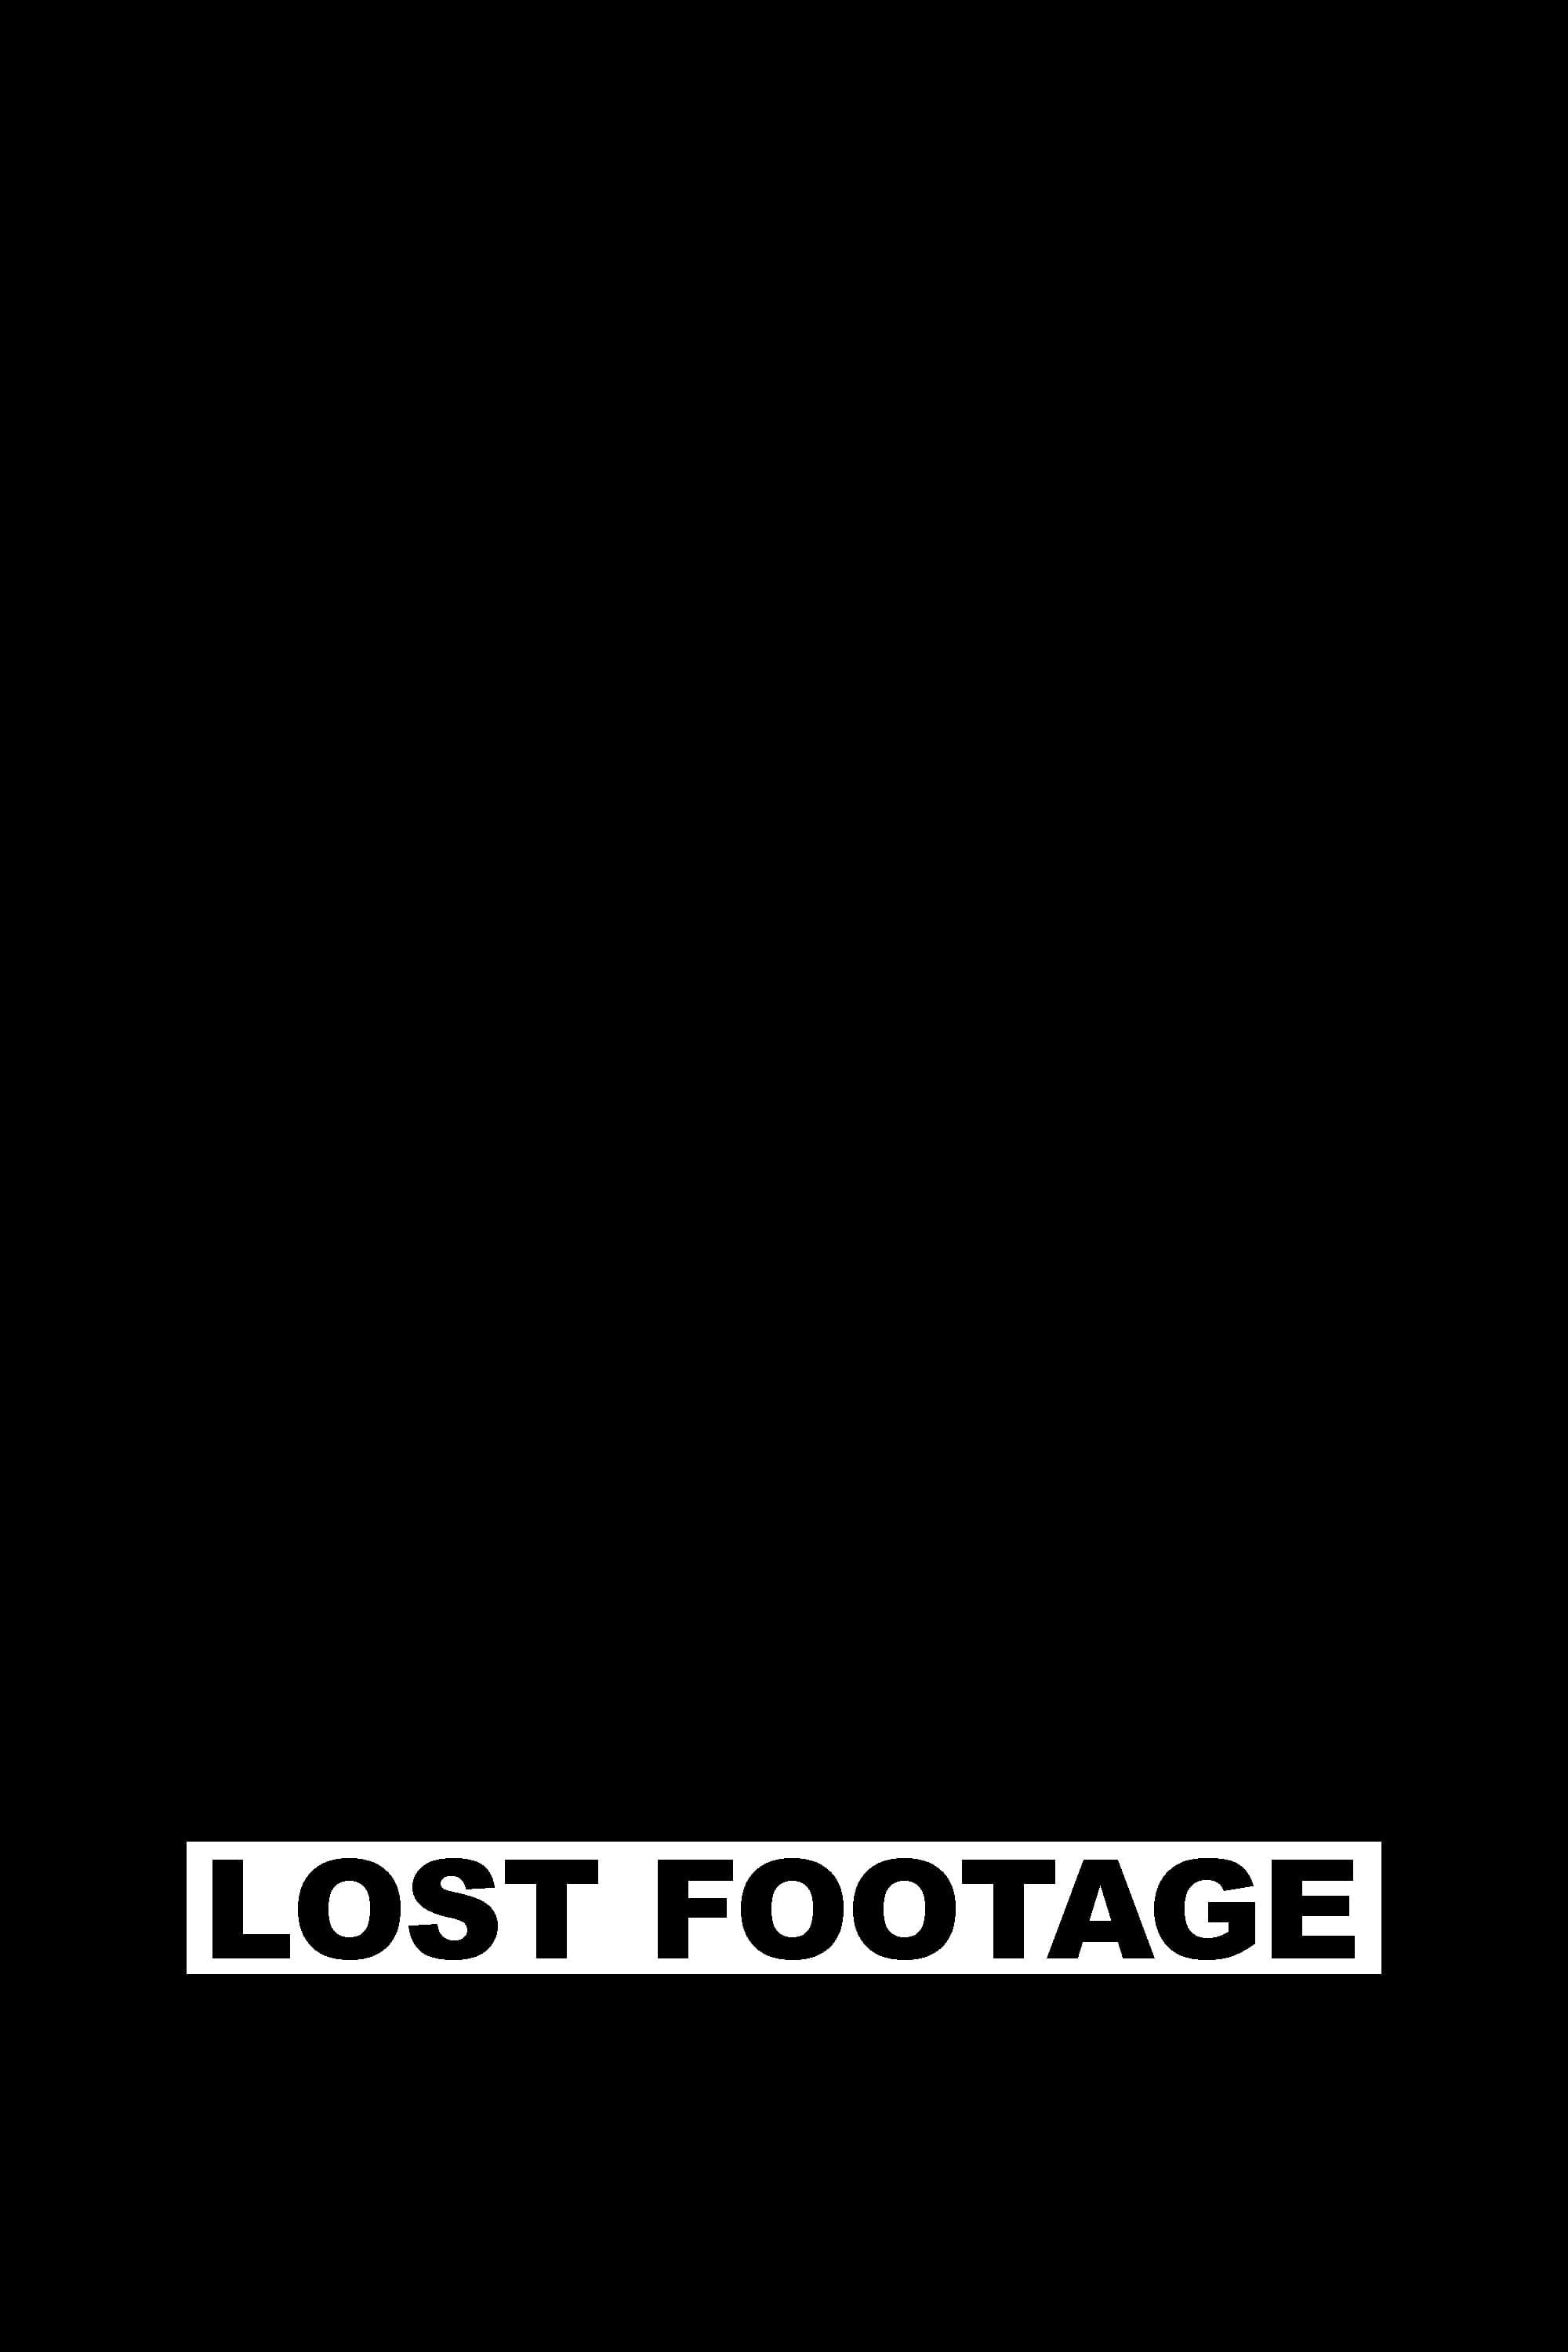 Lost Footage poster